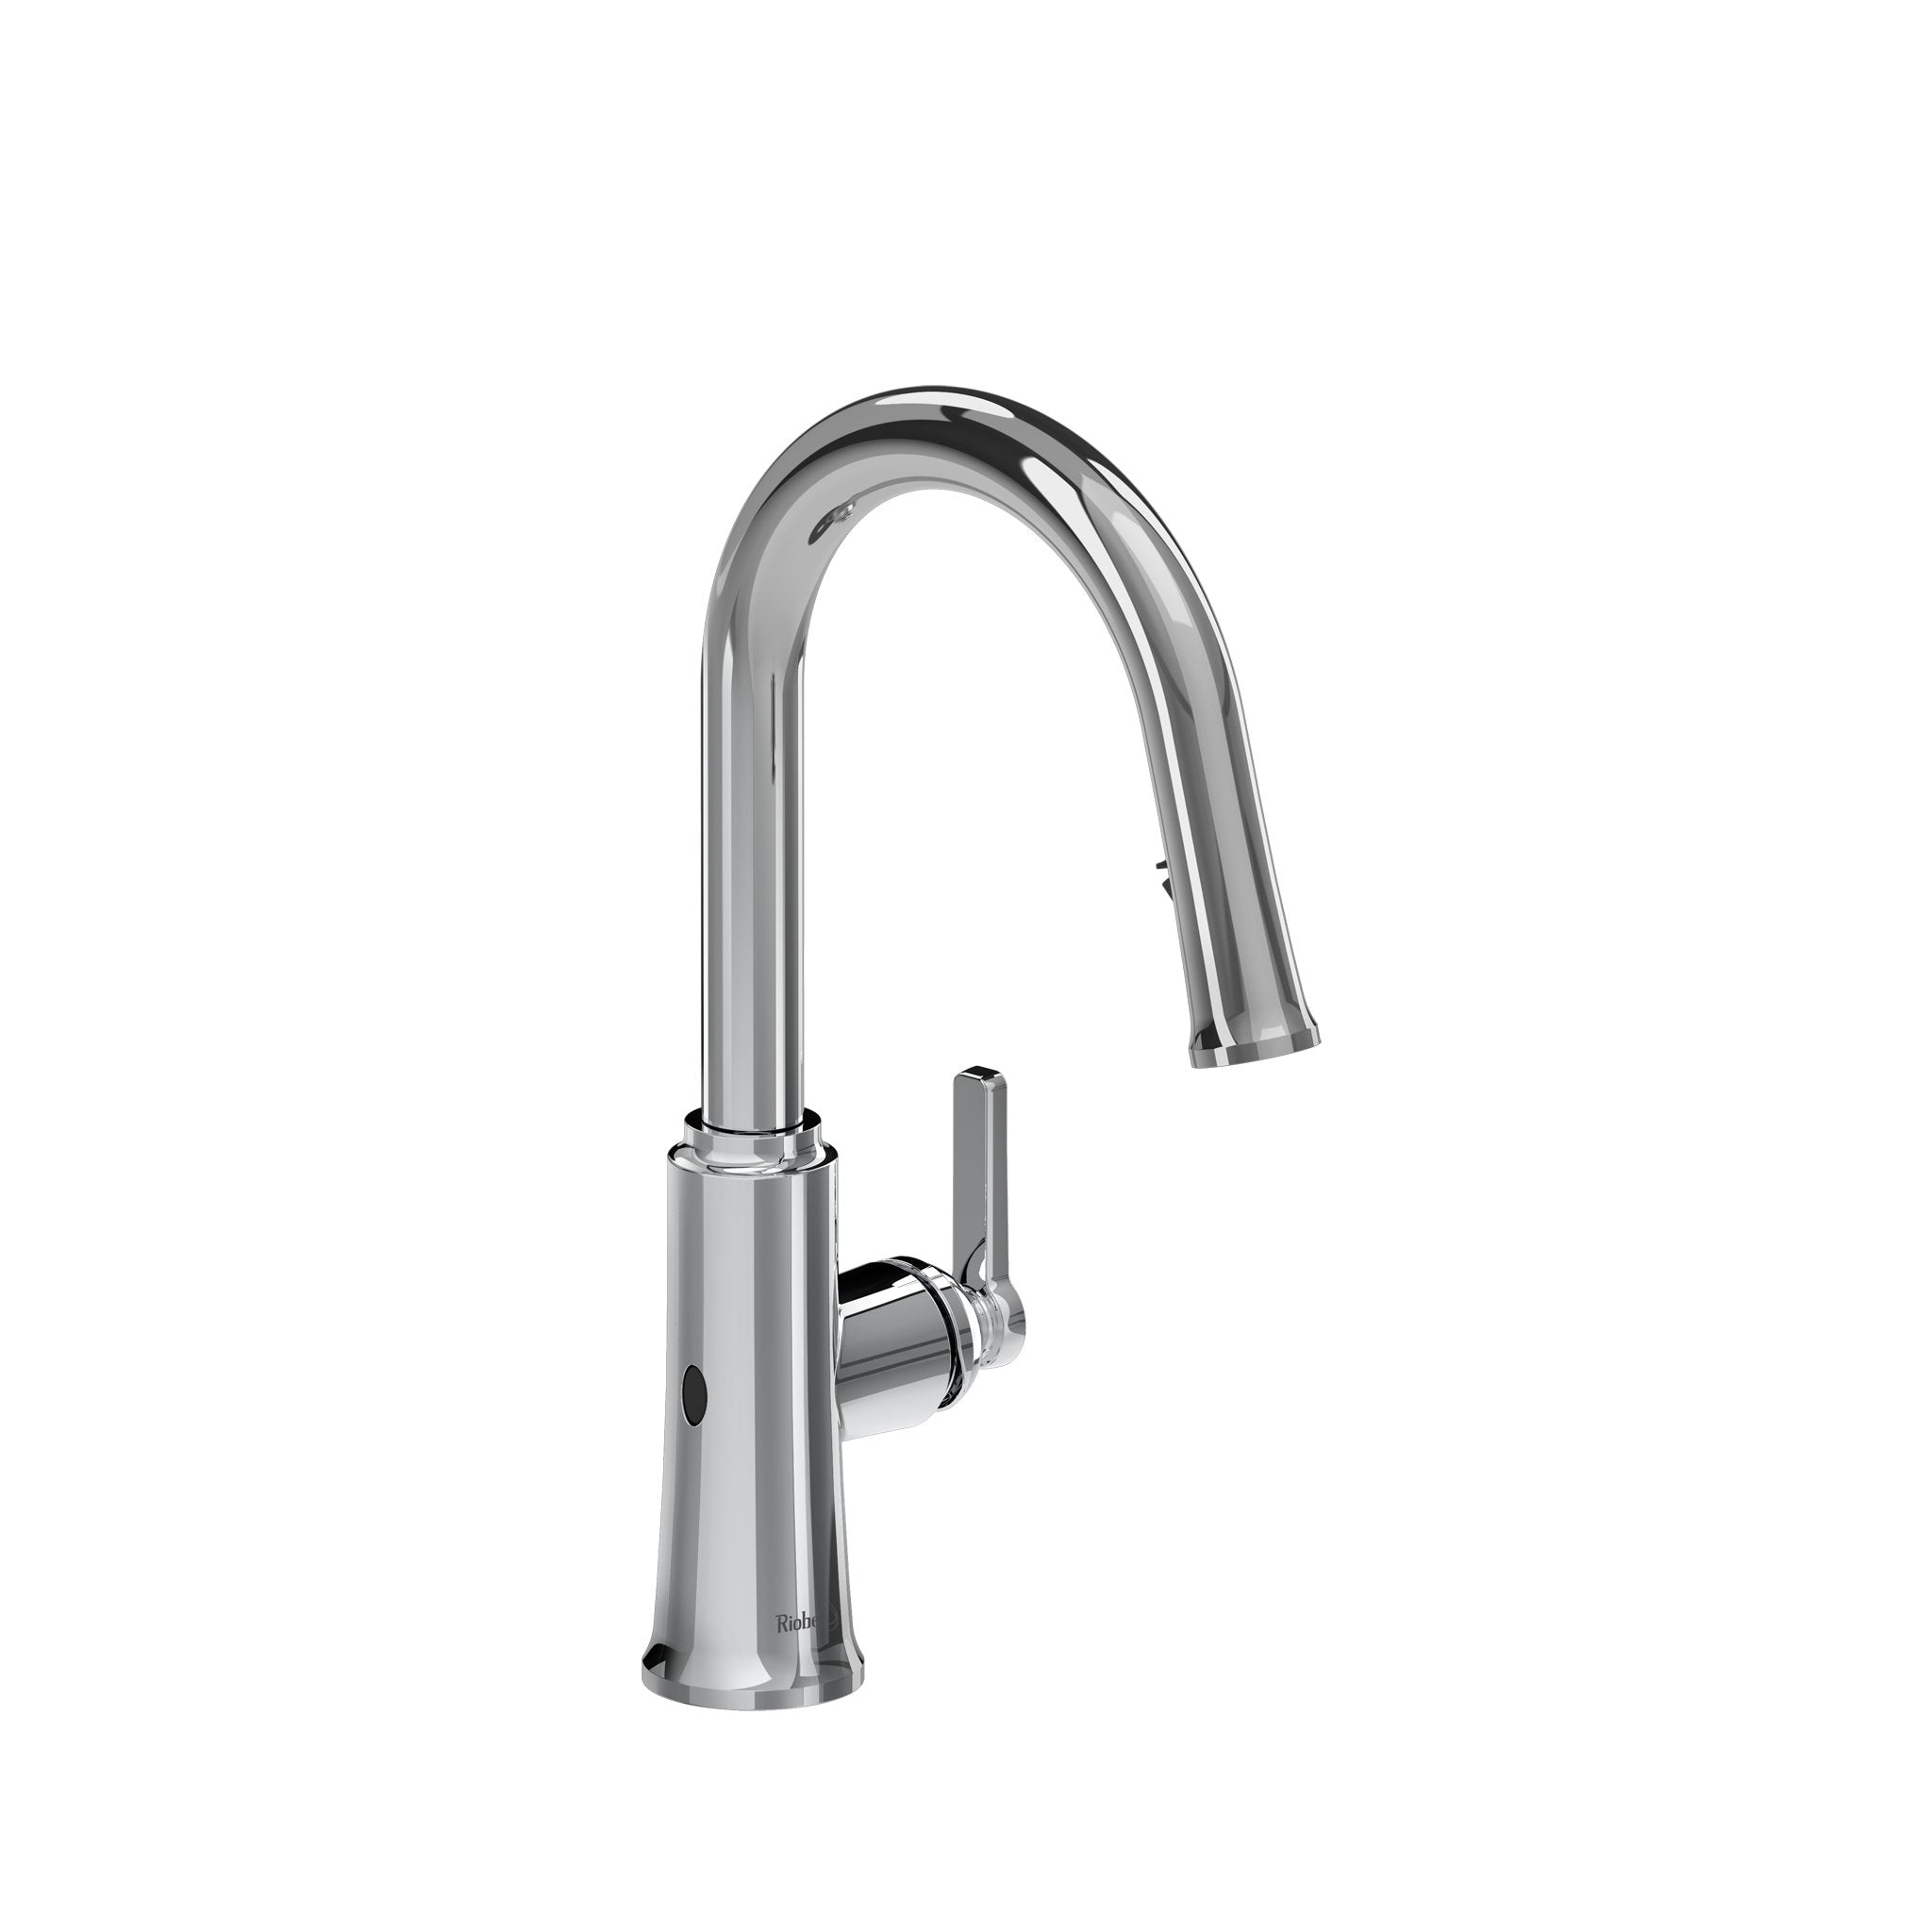 Riobel TTRD111C- Trattoria touchless kitchen faucet with spray